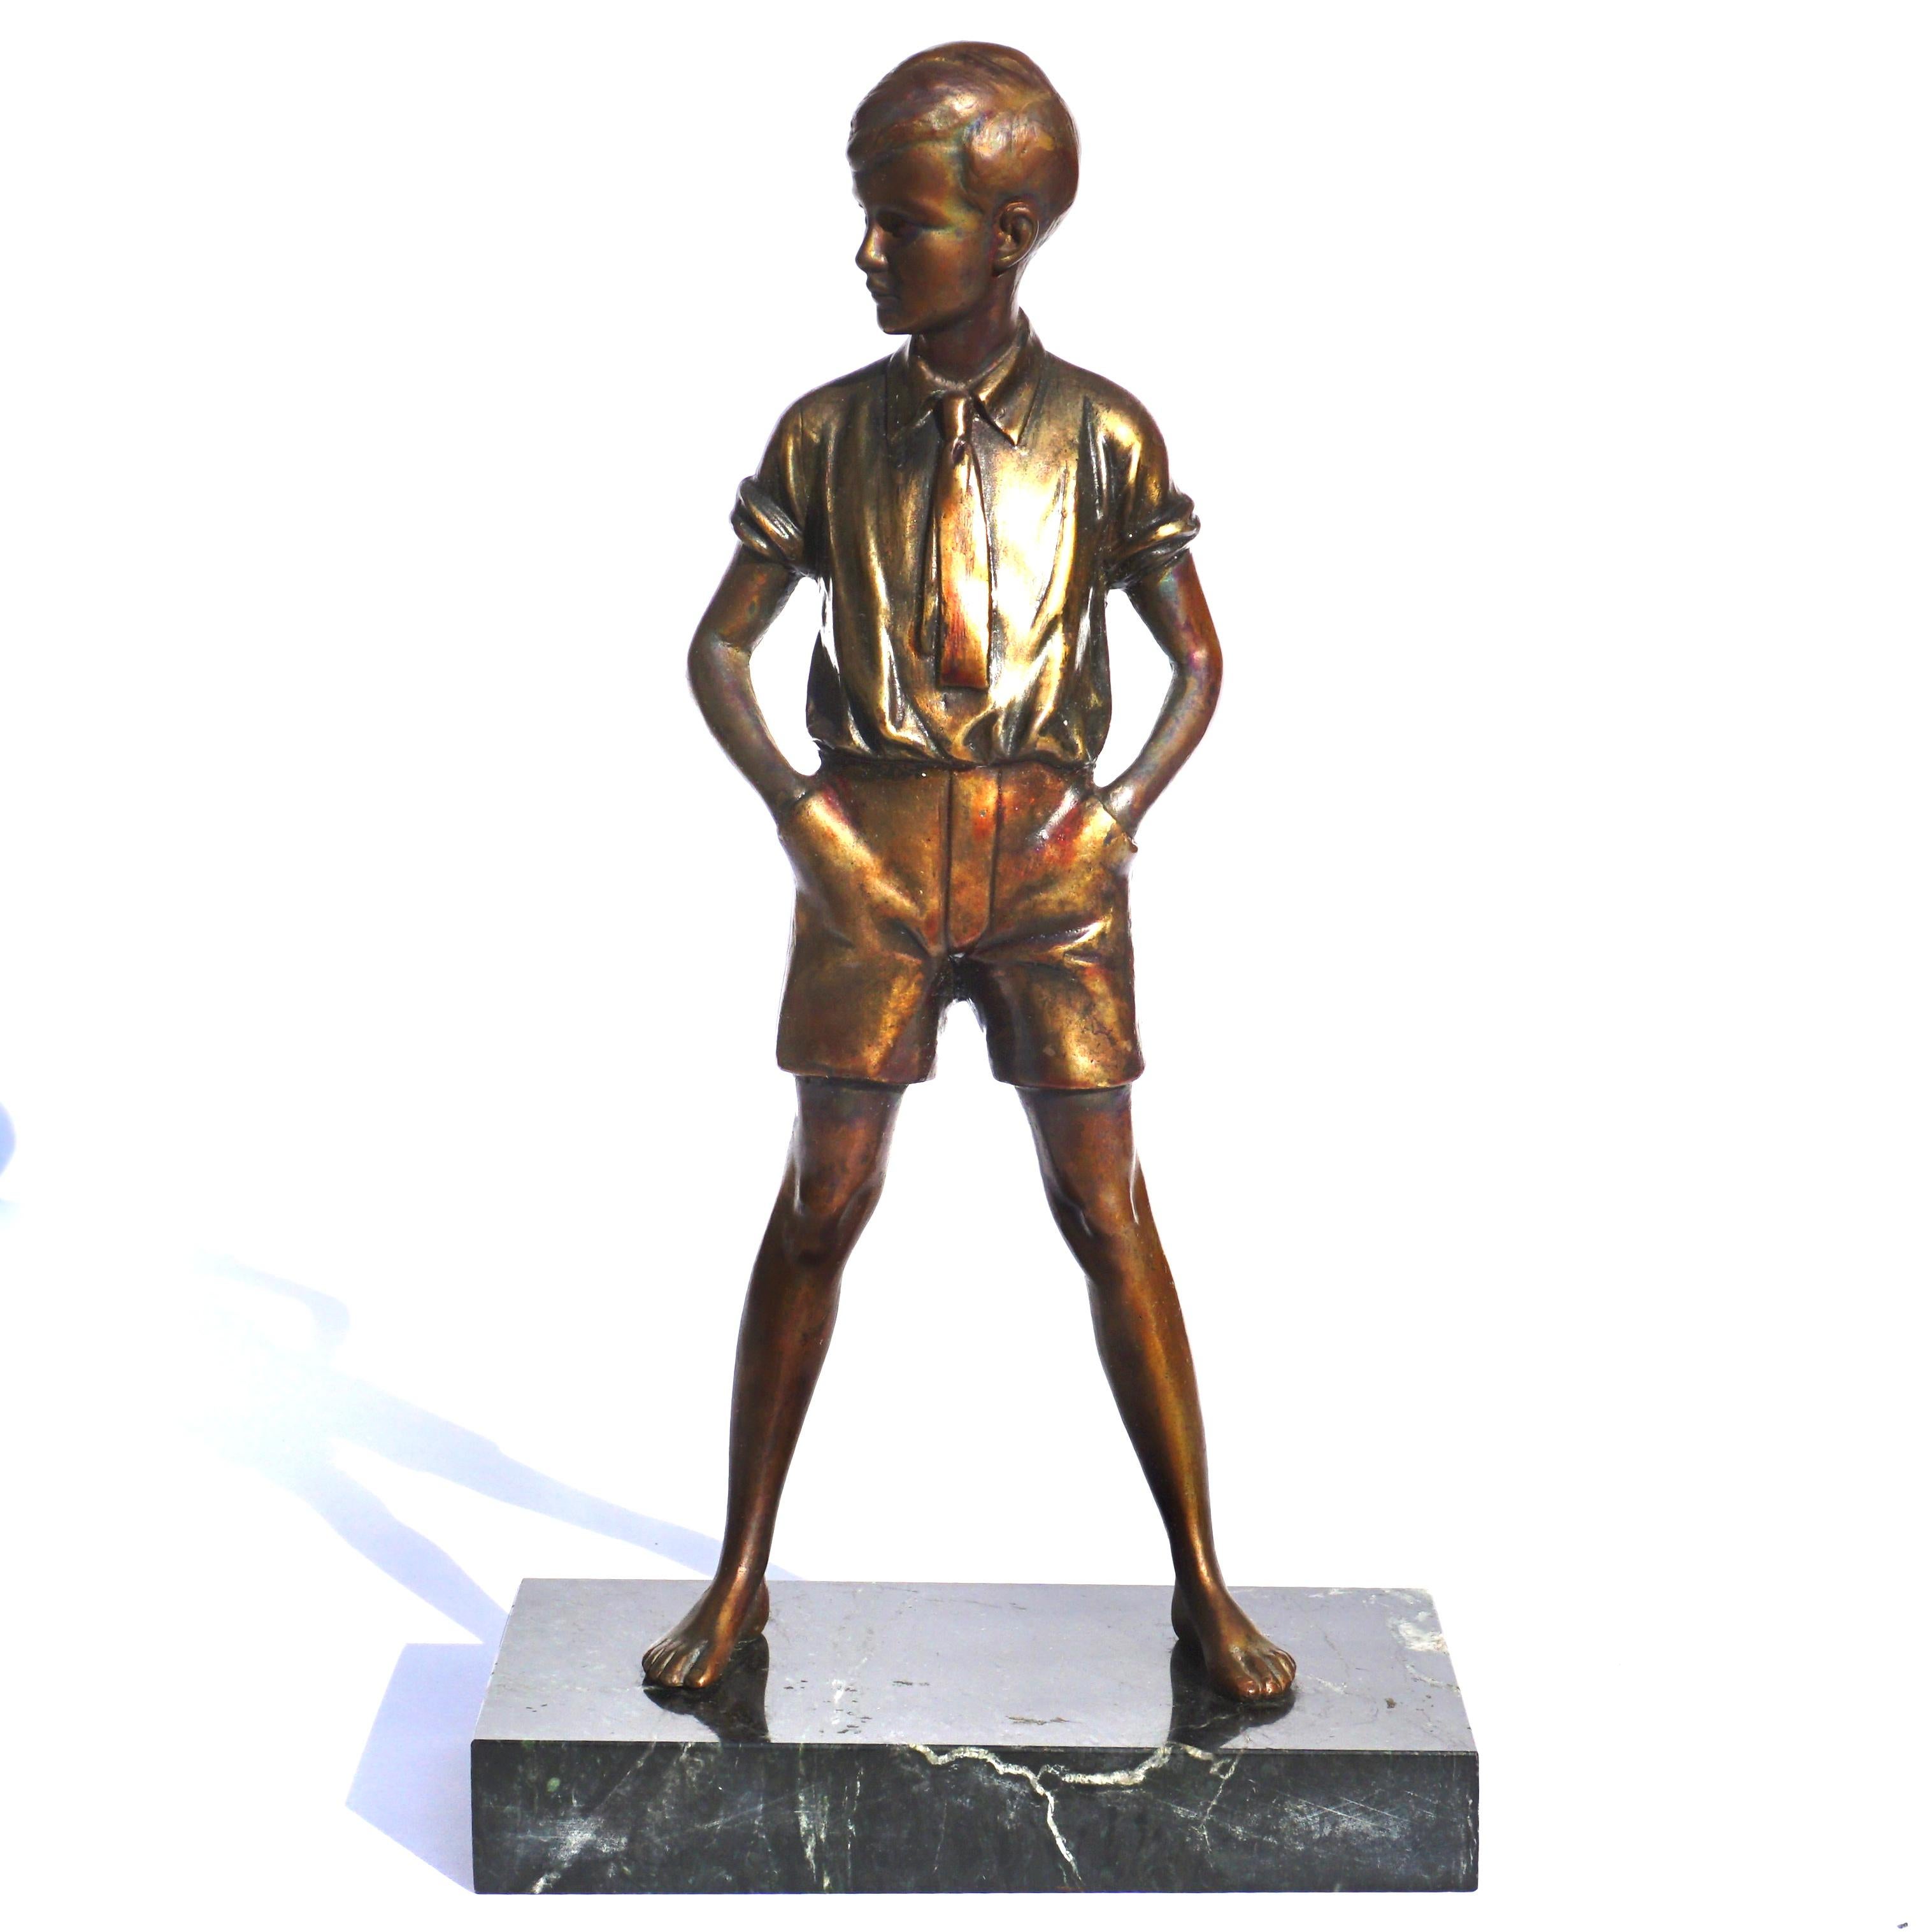 Johann Philipp Ferdinand Preiss (Germany, 1882-1943), Sonny Boy

patinated cast bronze, incised signature to figure's right foot.

A confidently standing youth figure depicted with tie and smart dress with hands in pockets, mounted atop a